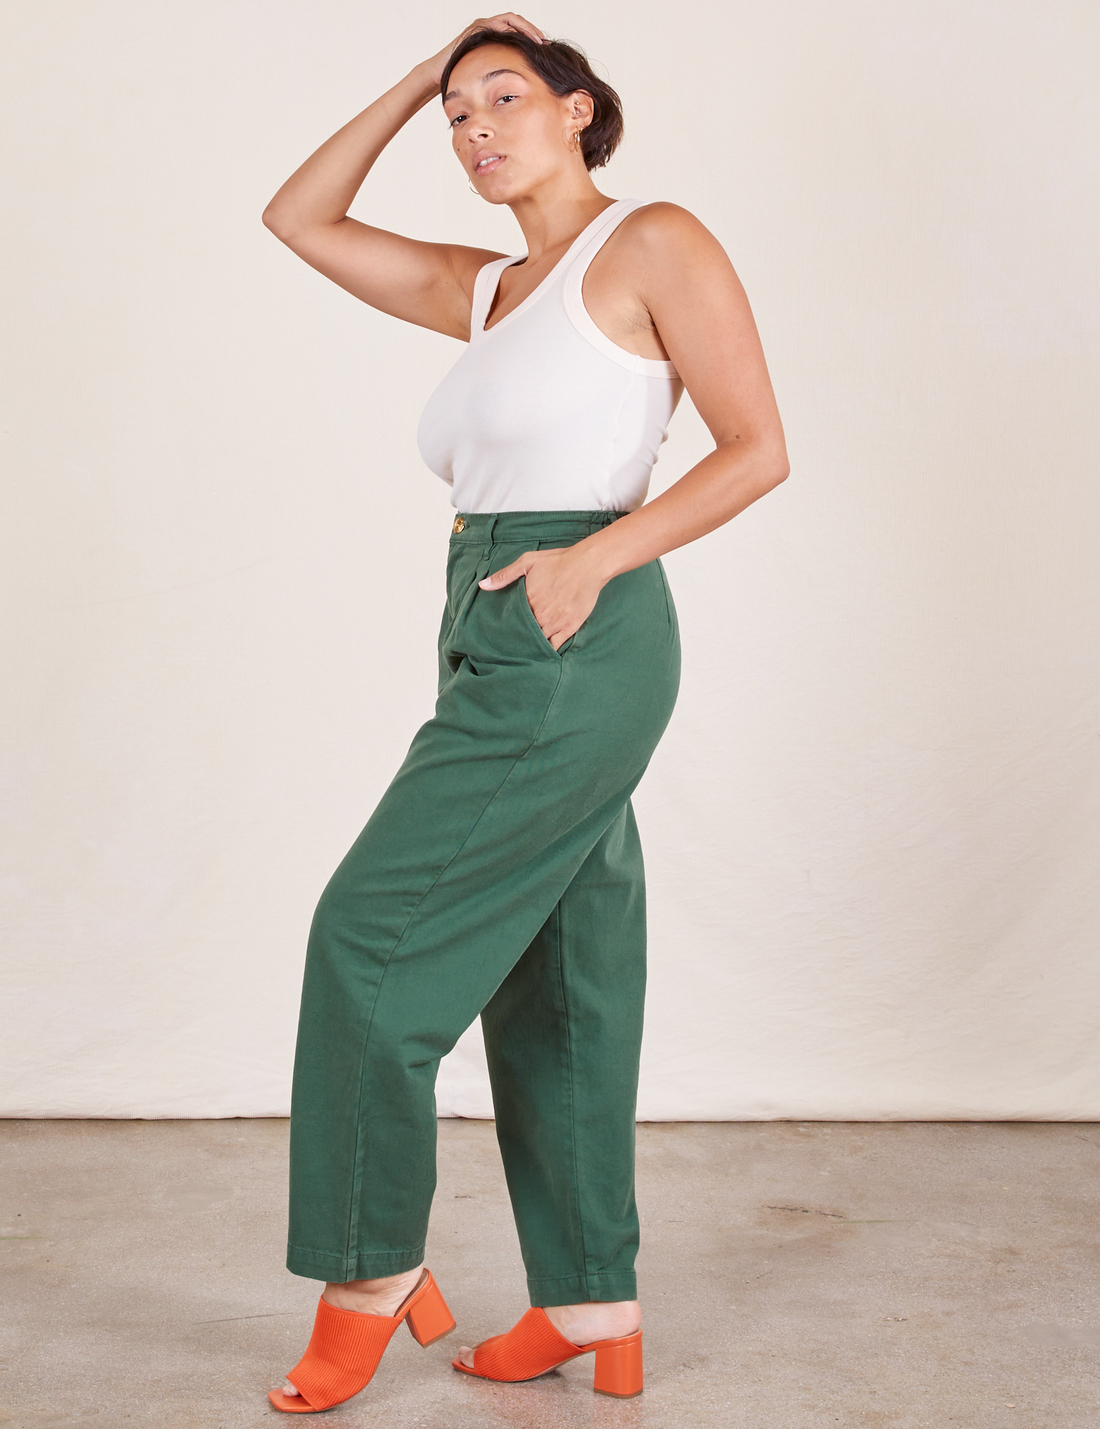 Side view of Heavyweight Trousers in Dark Emerald Green and vintage off-white Tank Top worn by Tiara